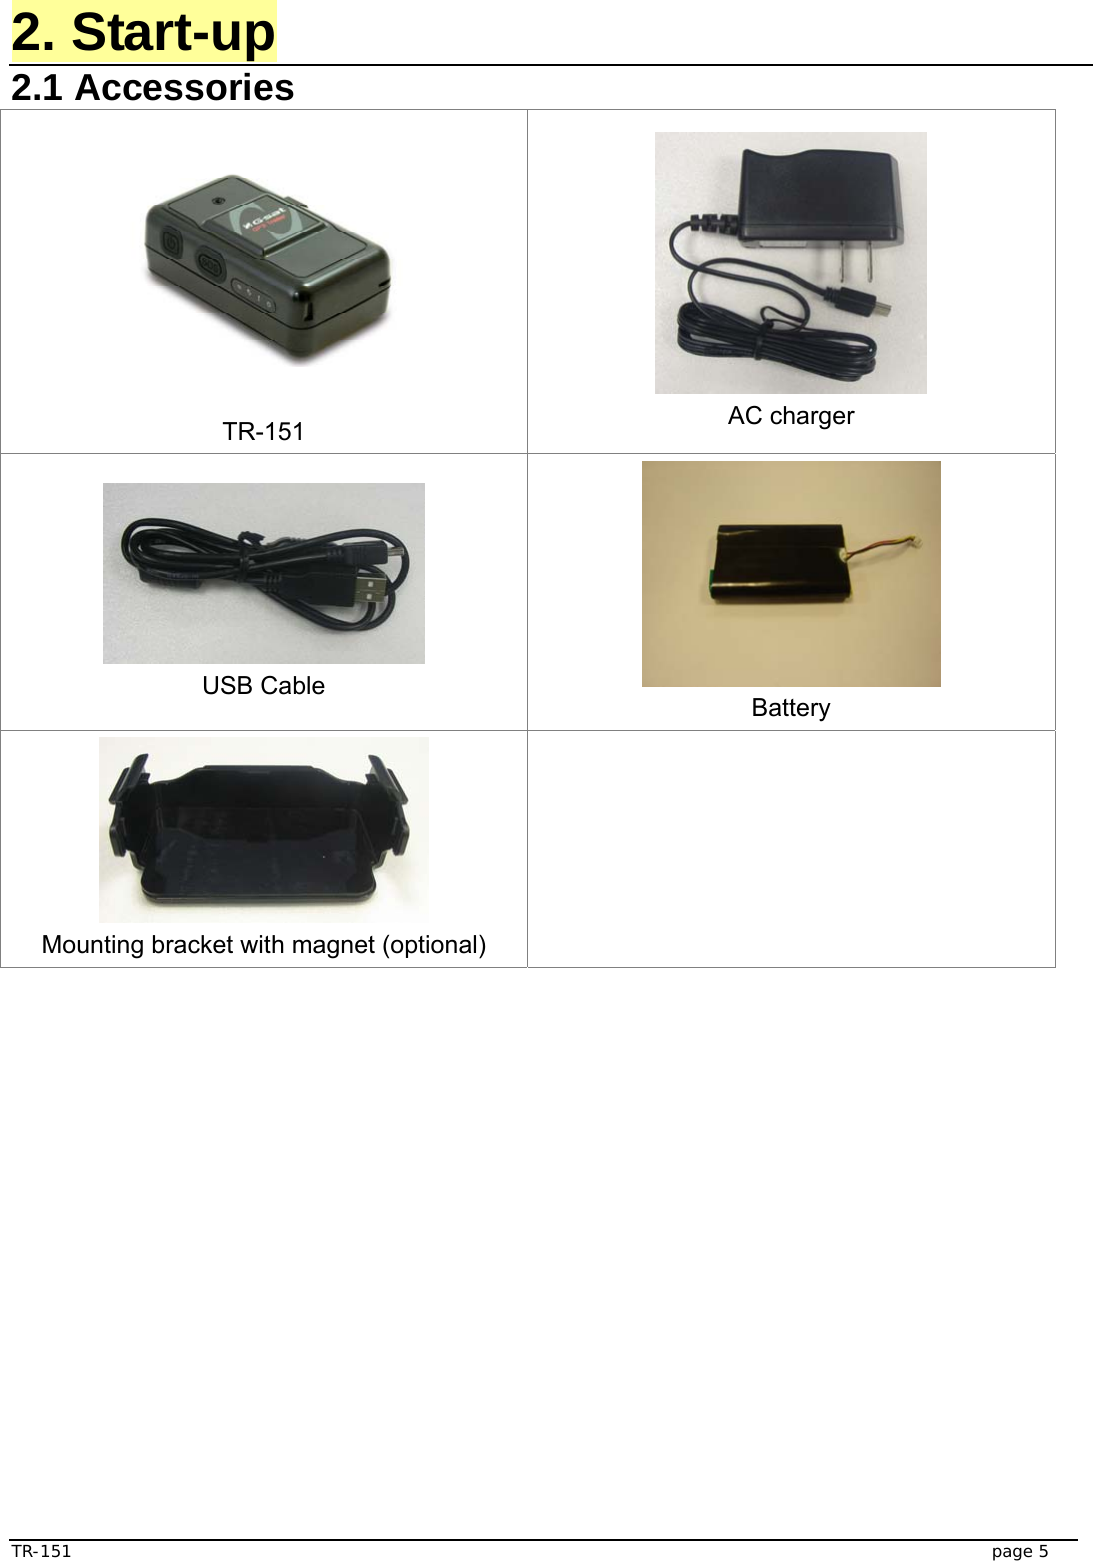  TR-151   page 5 2. Start-up 2.1 Accessories    TR-151  AC charger  USB Cable   Battery   Mounting bracket with magnet (optional)     